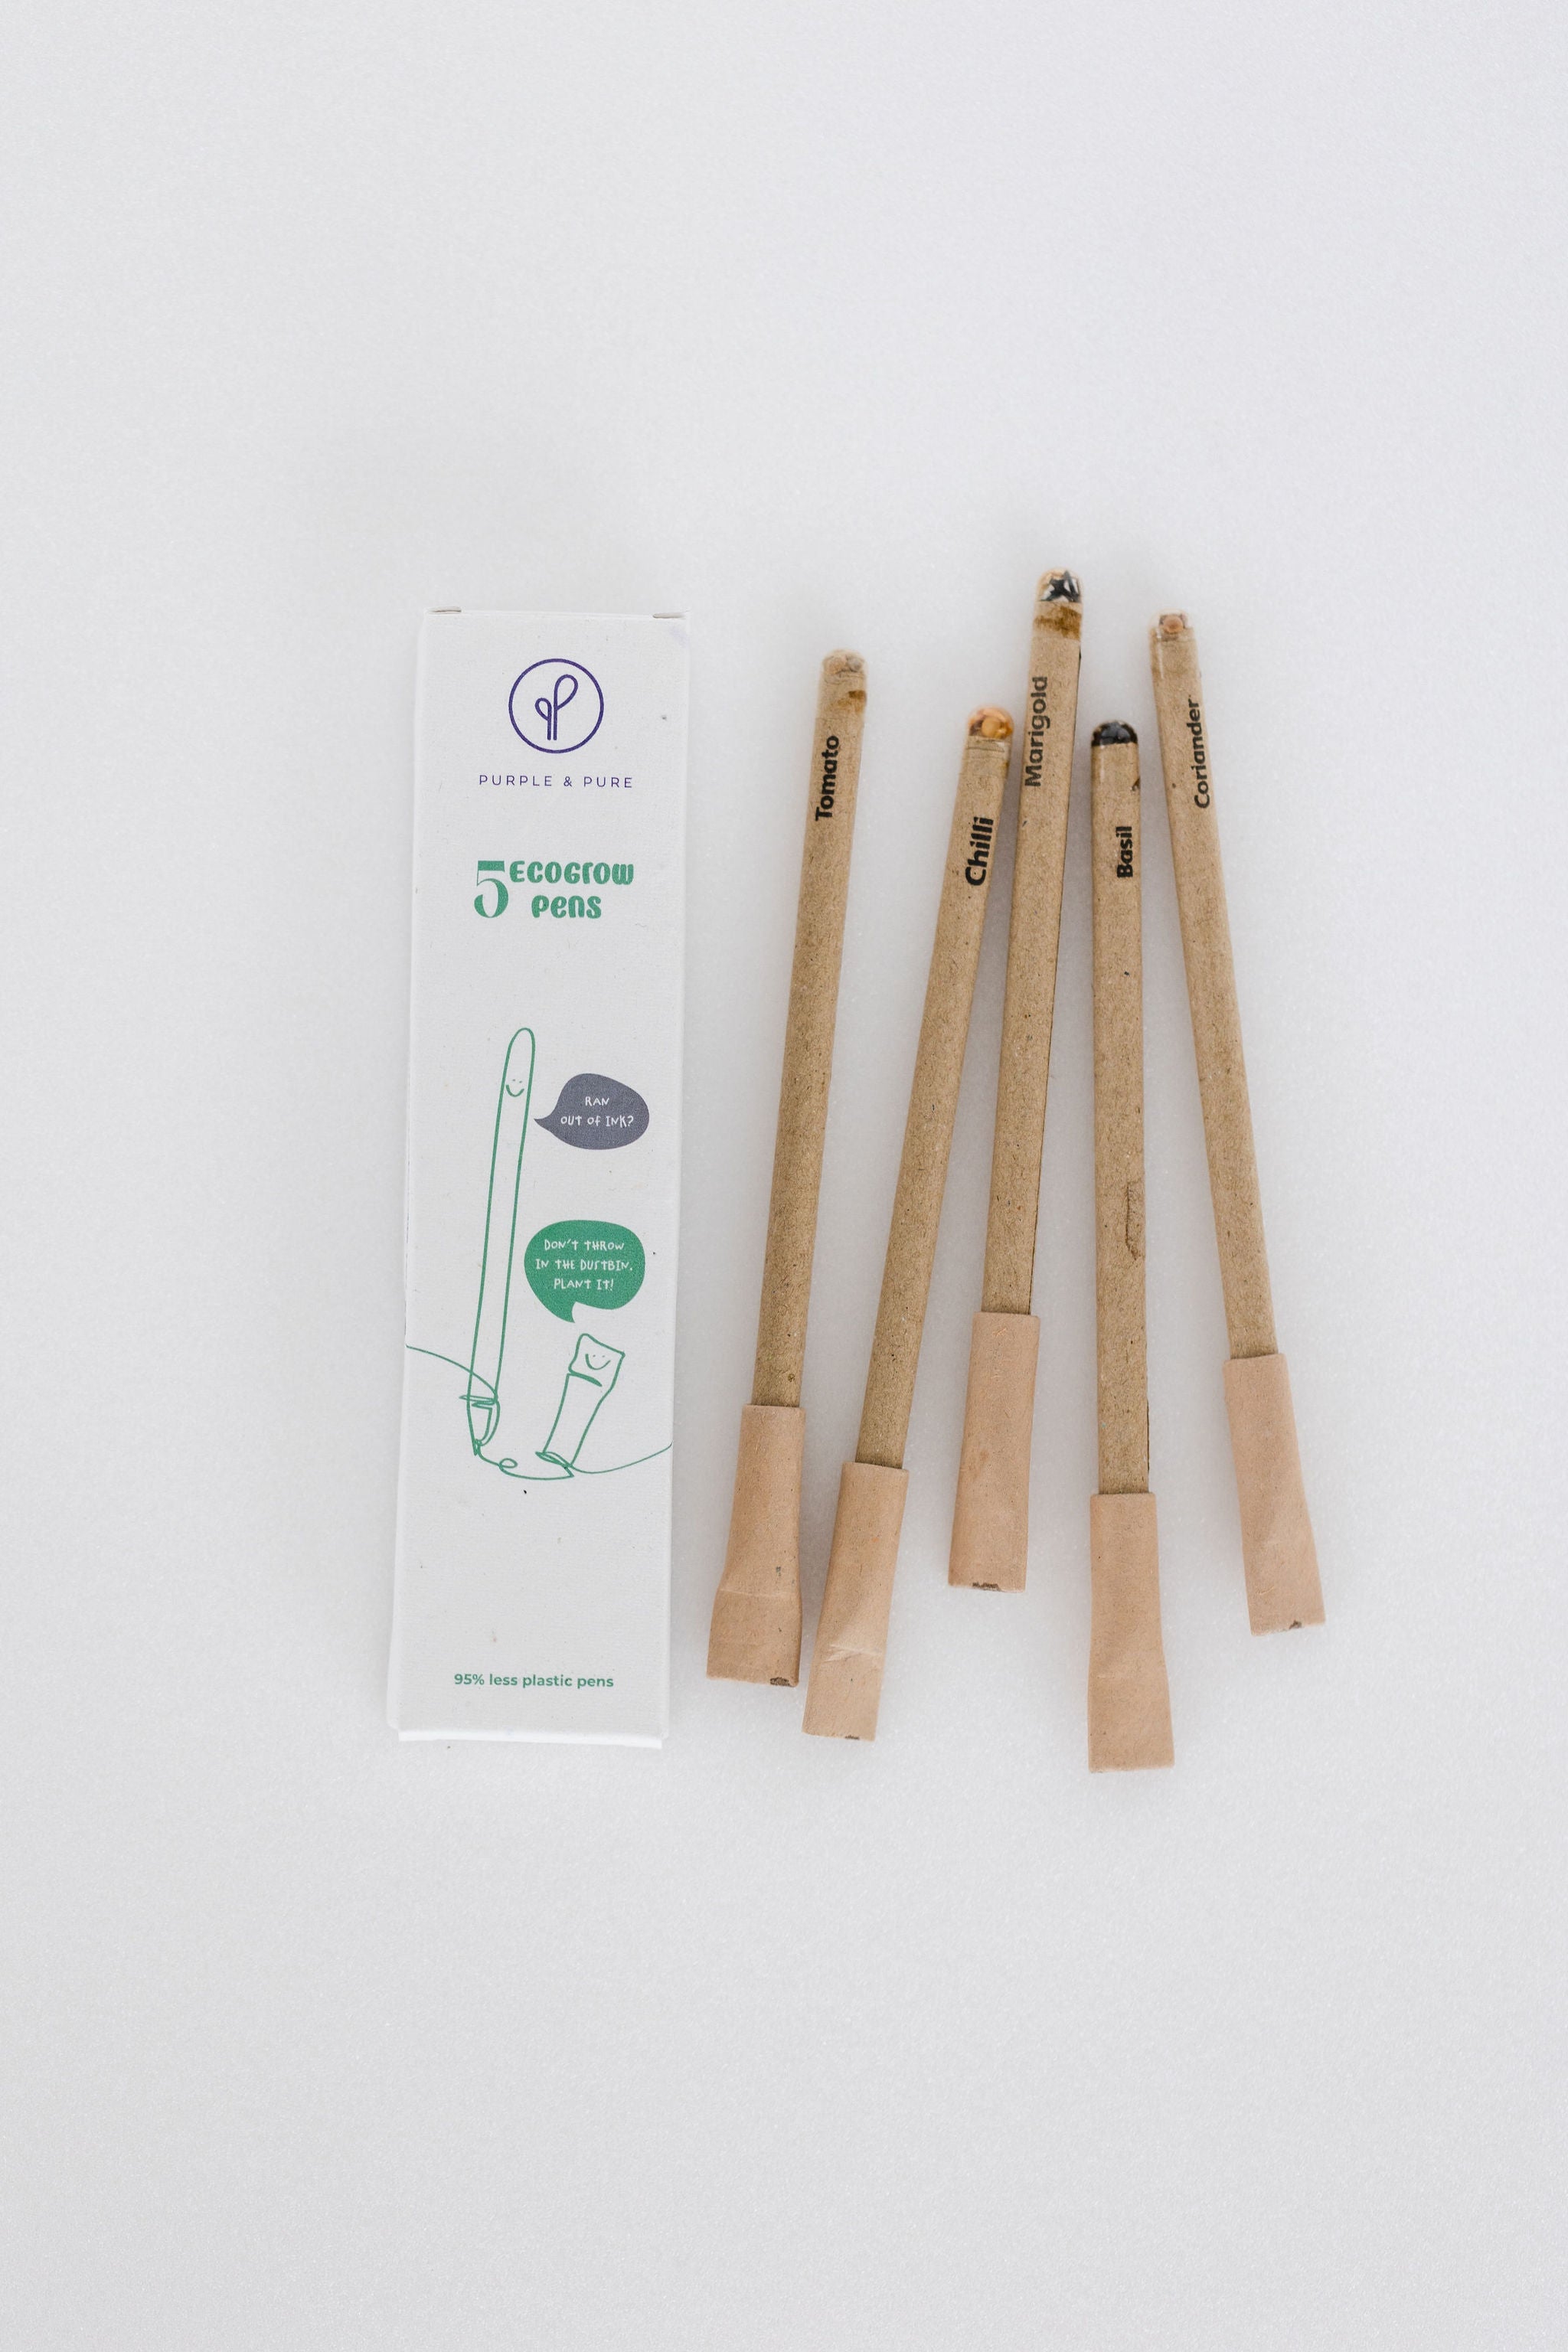 Purple & Pure Recycled Paper Plantable  Seed Pens - Gift Box